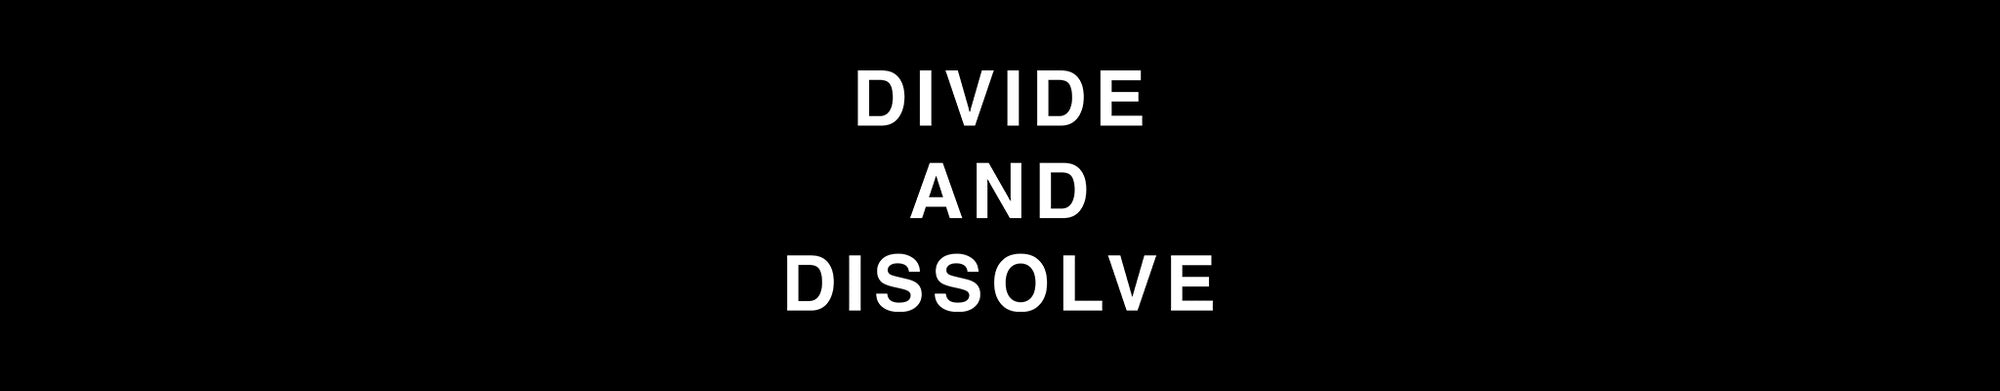 DIVIDE AND DISSOLVE